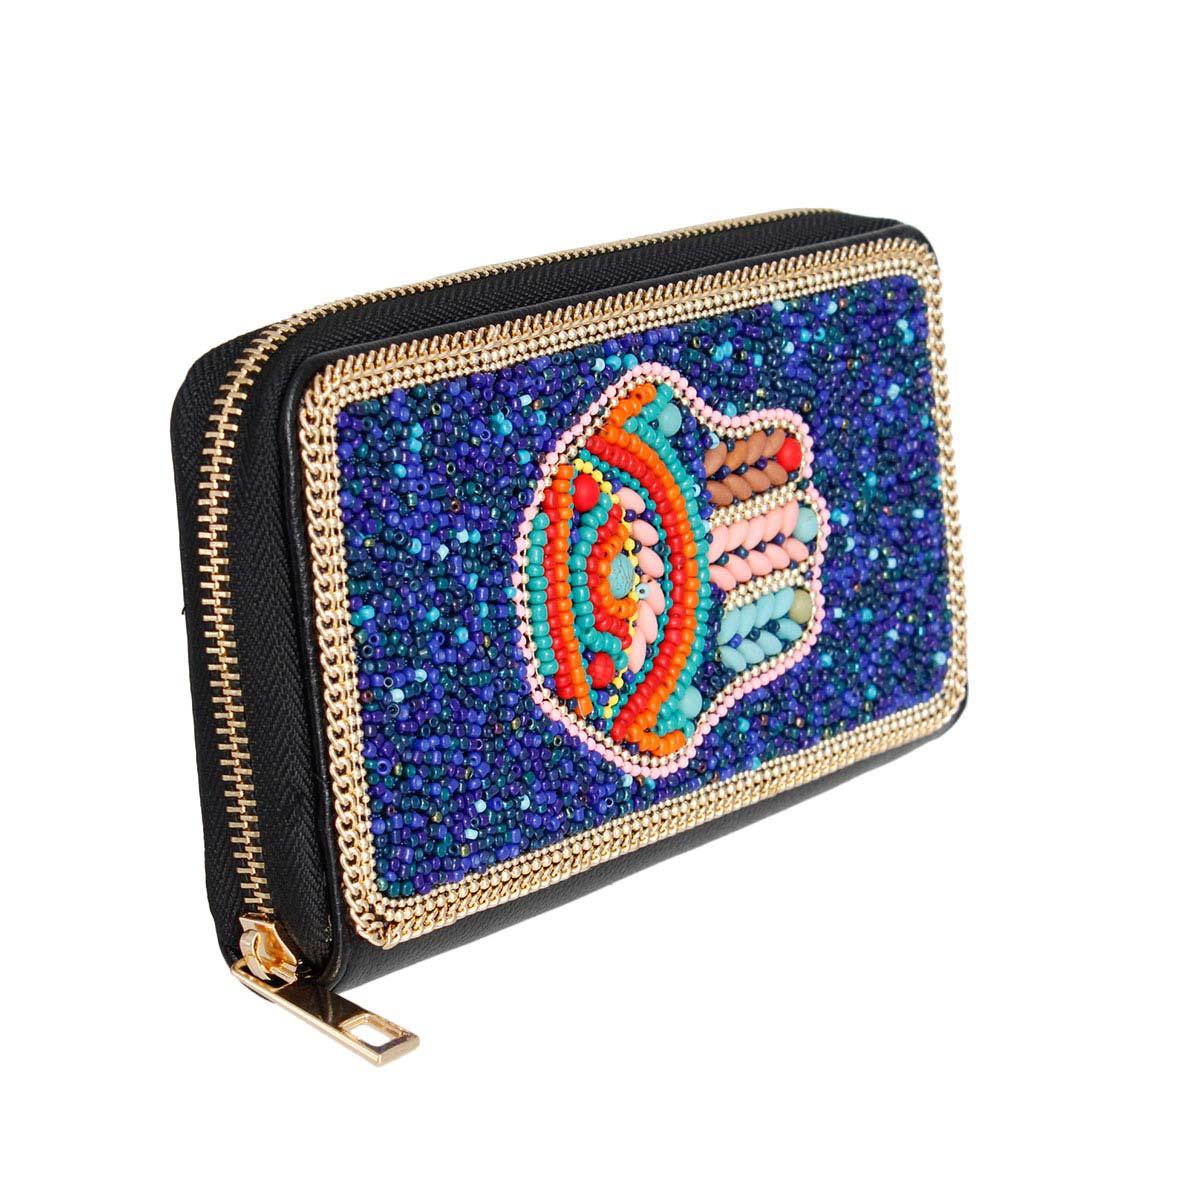 Stunning Hamsa-hand Beaded Wallet: Perfect Accessory for Women